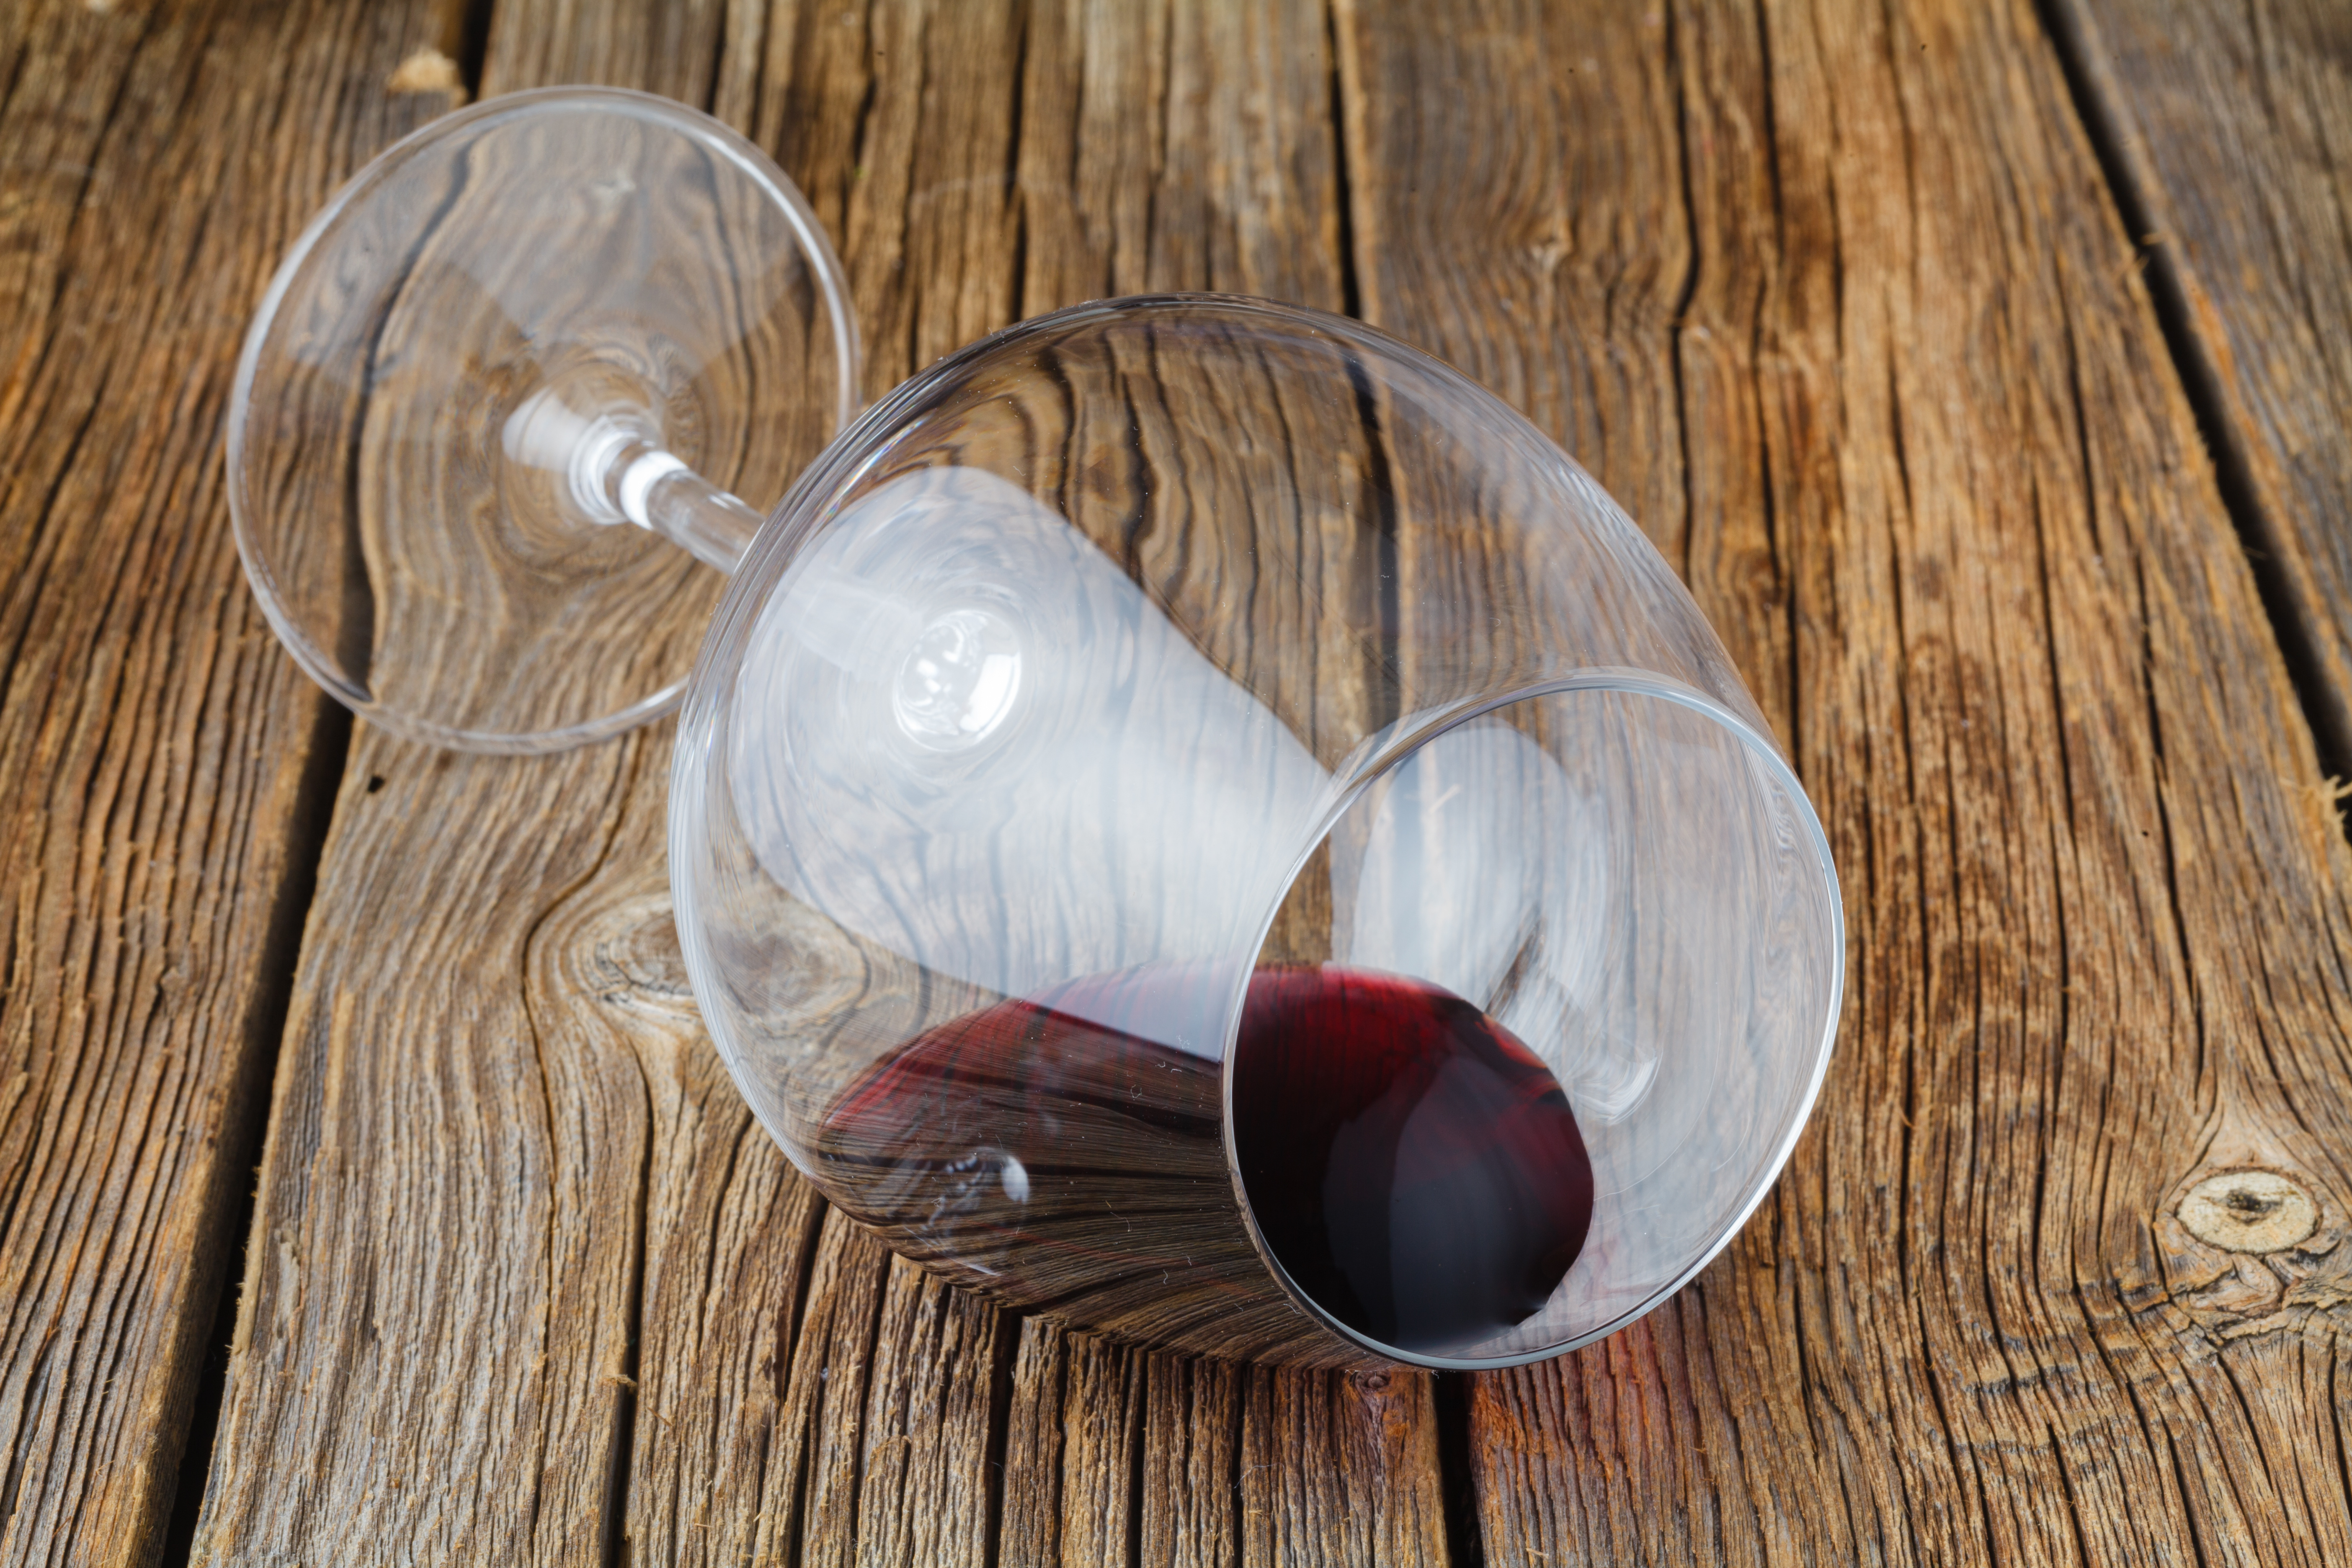 One glass Half of red wine on wooden table laid on its side with the wine staying inside the glass